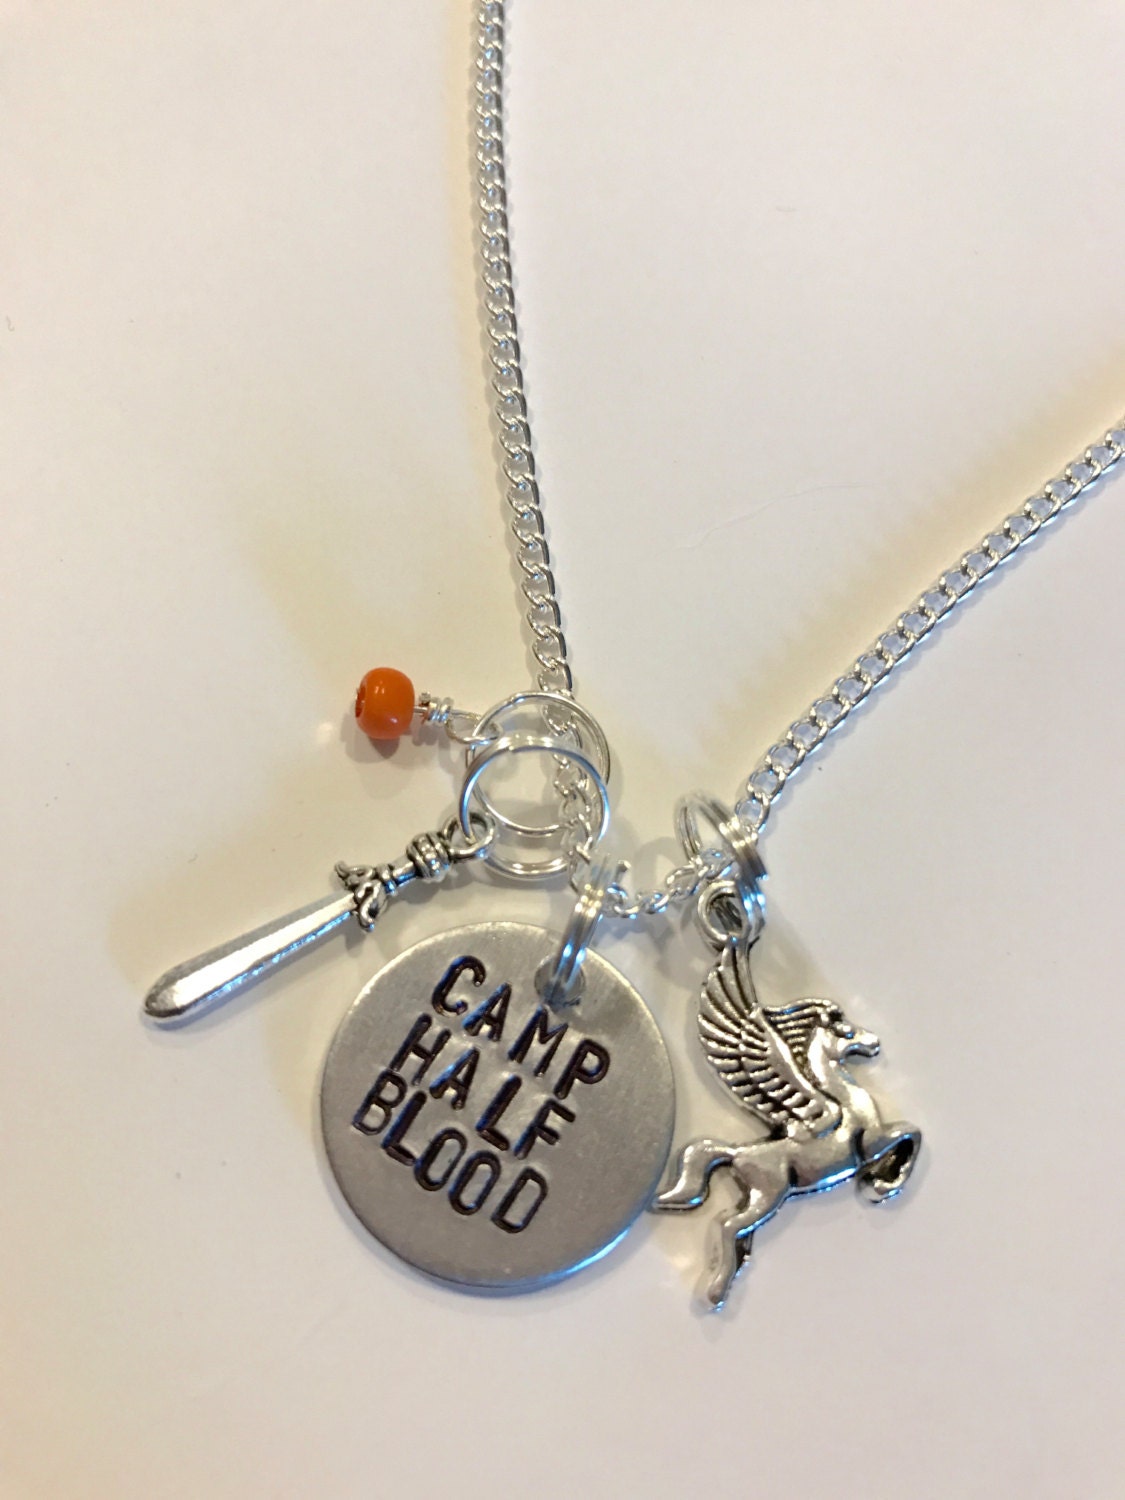 Get Your Own Camp Halfblood Necklace! | Percy Jackson Fandom